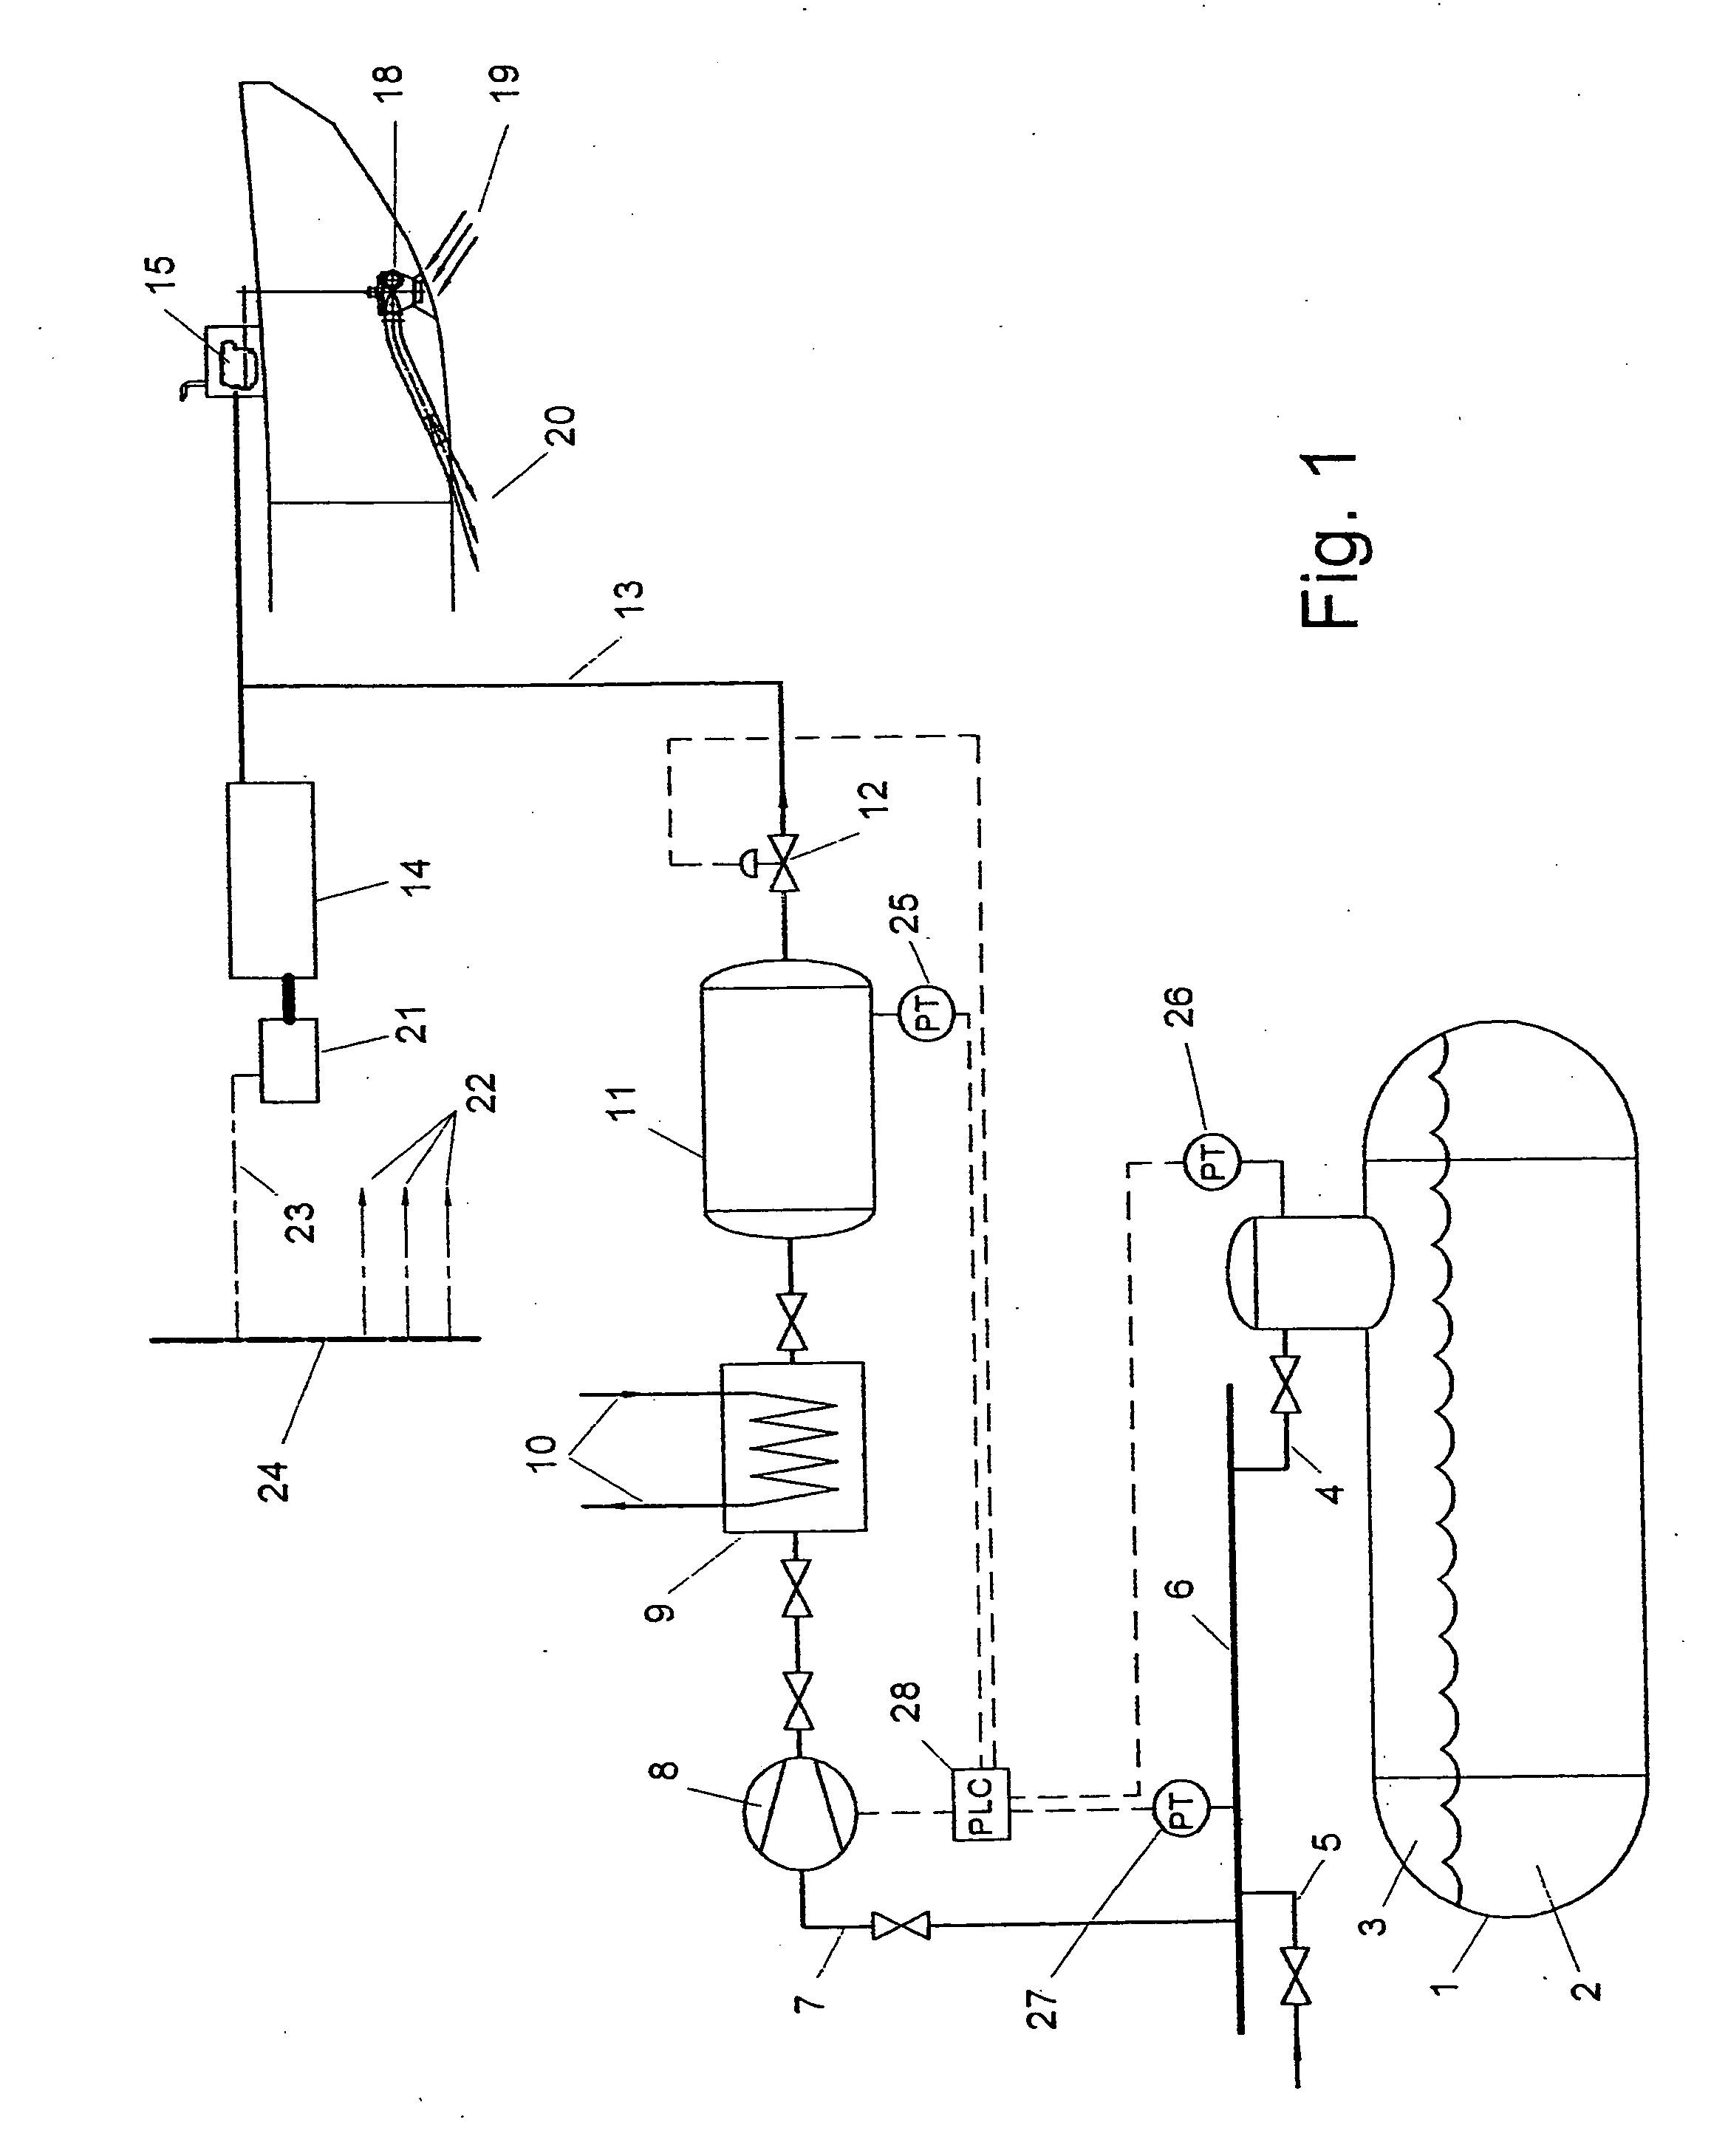 System and process for transporting LNG by non-self-propelled marine LNG carrier